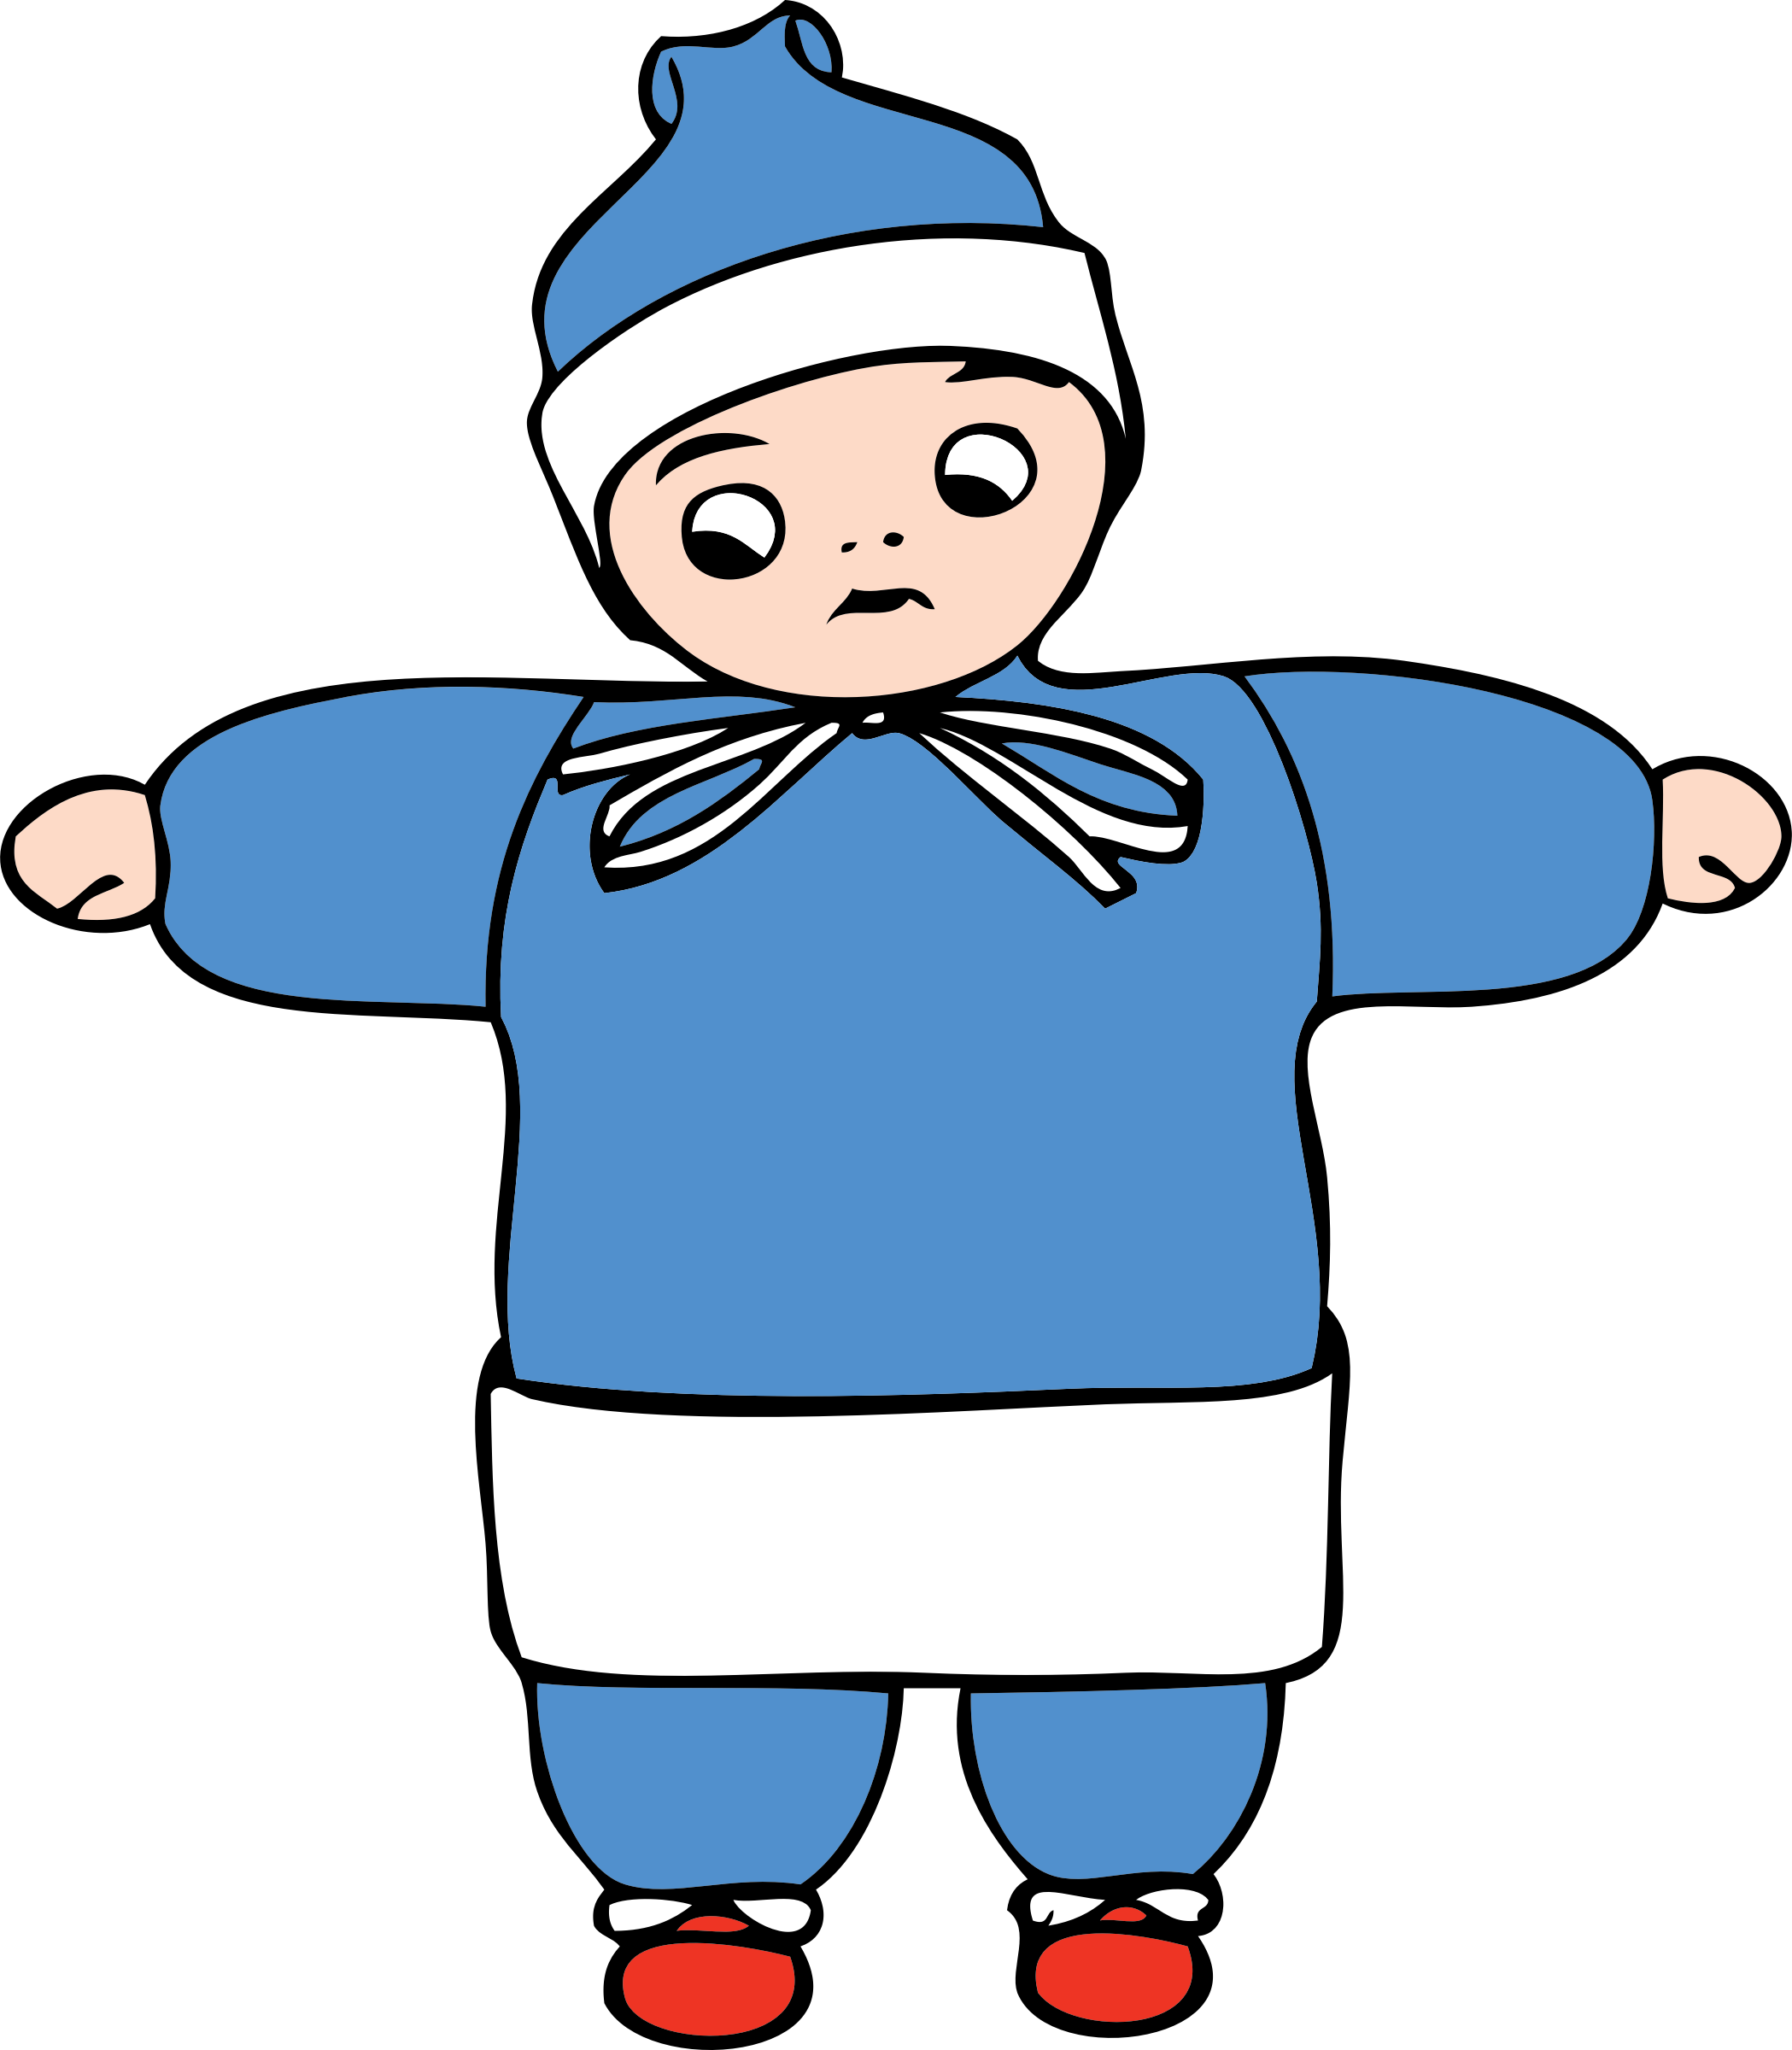 Human clipart child. Snow big image png